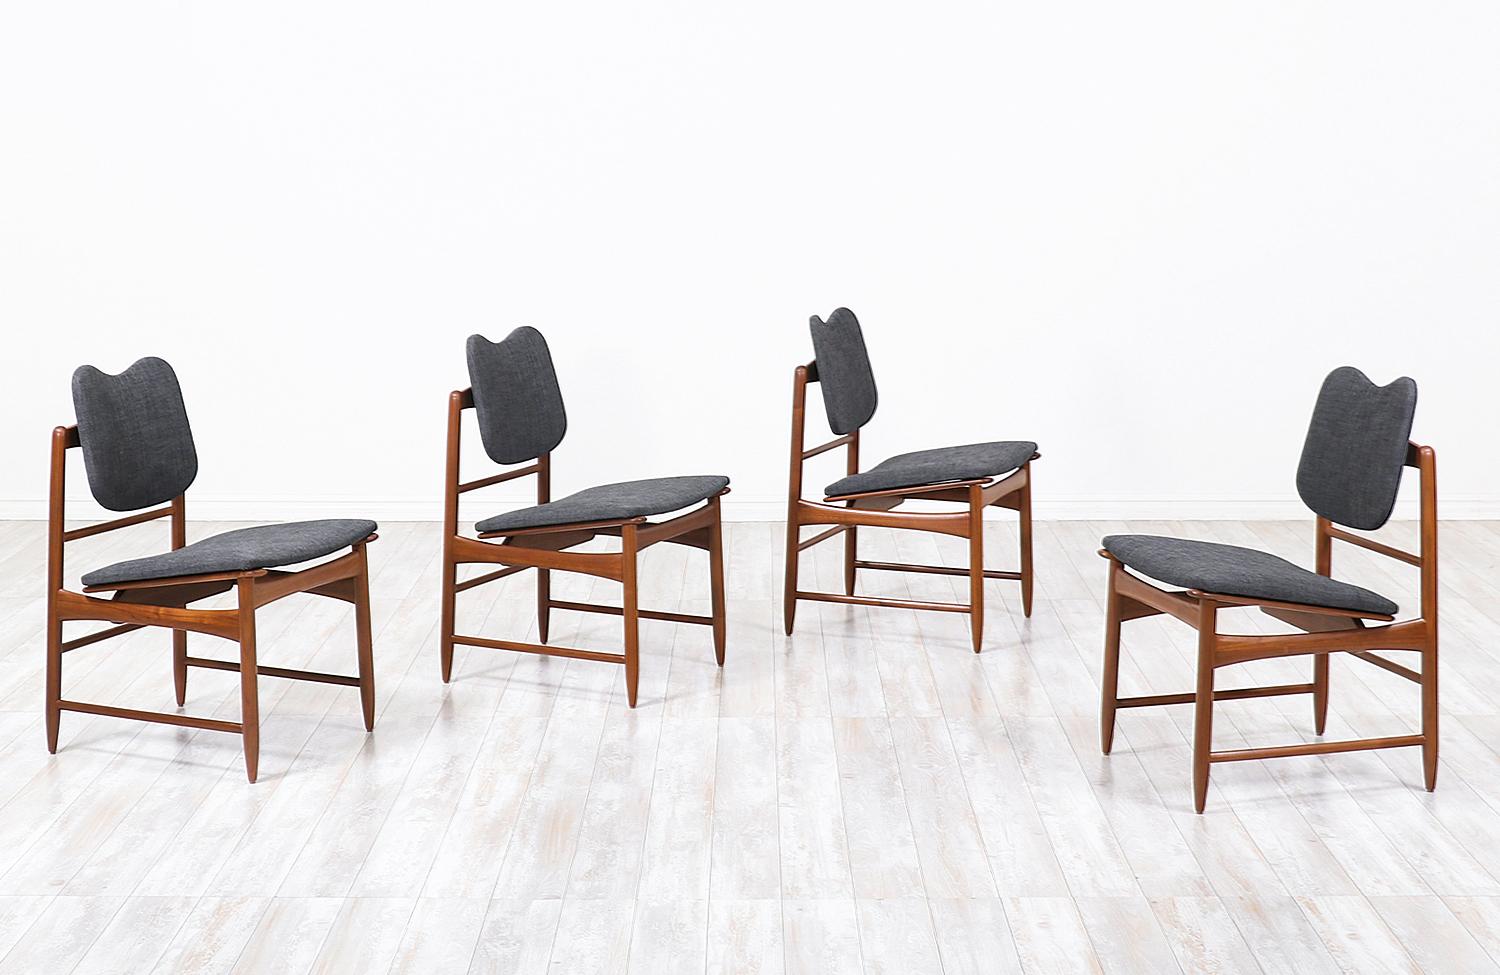 Elegant set of four dining chairs designed by Greta M. Grossman for Glenn of California in the United States, circa 1950s. This beautiful set of dining chairs feature a sturdy walnut wood frame with an angled seat and a heart-shaped top backrest.